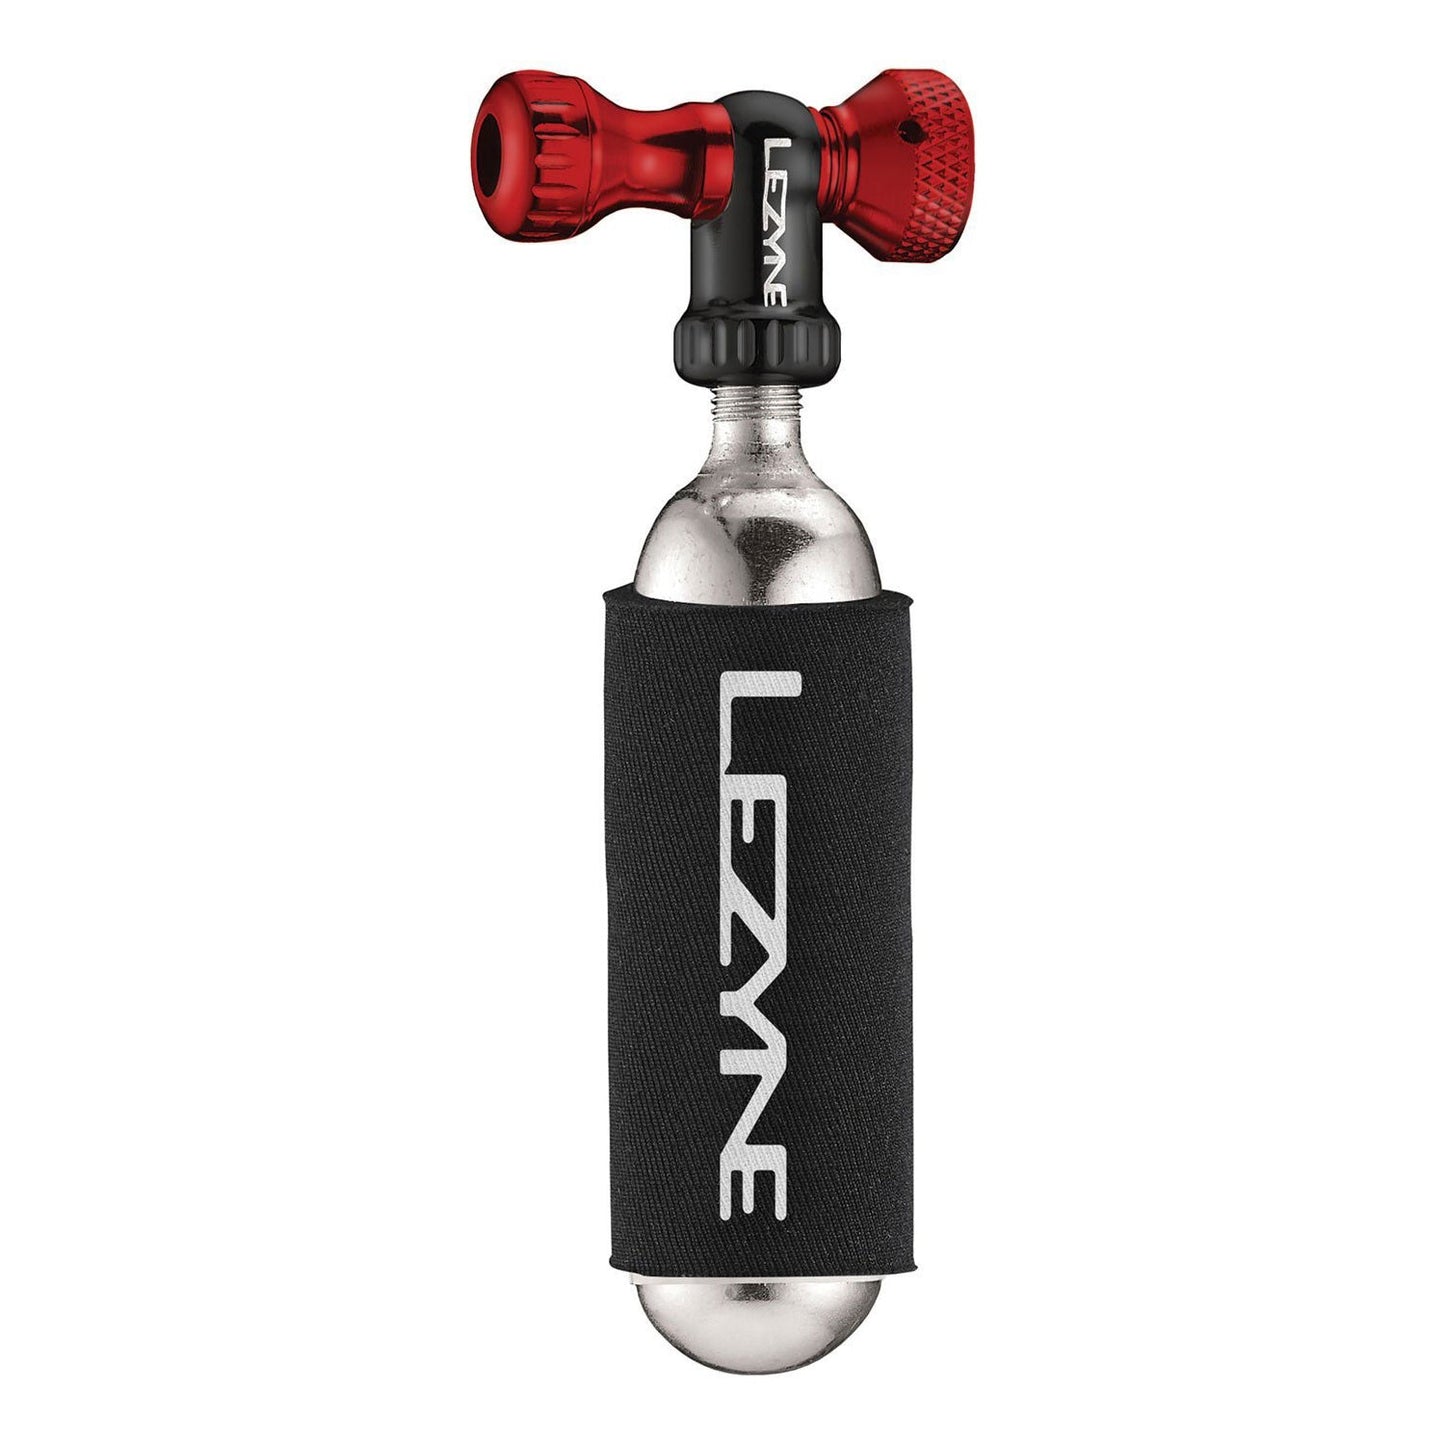 Lezyne Control Drive CO2 Inflator - Red - With 1 x 25g Co2